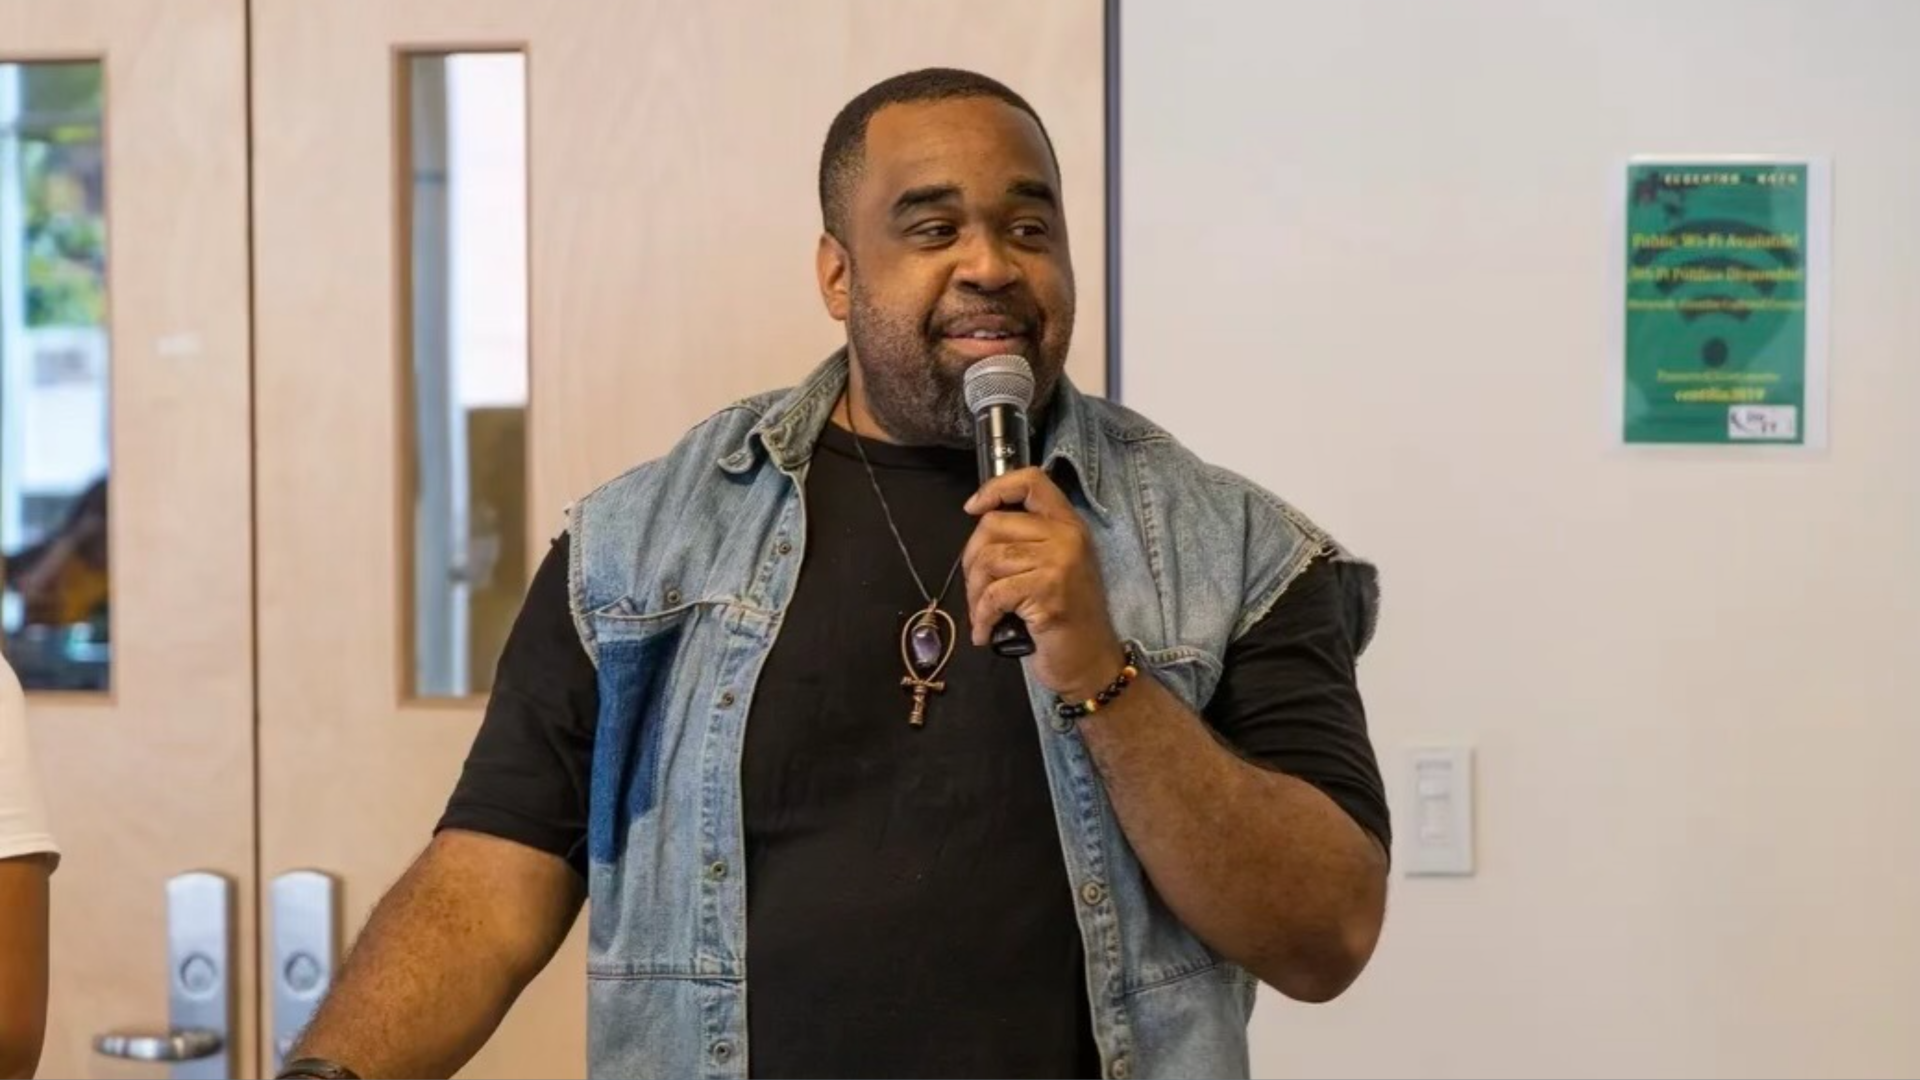 Jeffrey Cheatham speaks into a microphone in a room with neutral tones. He is wearing a denim vest and a black T-shirt. 